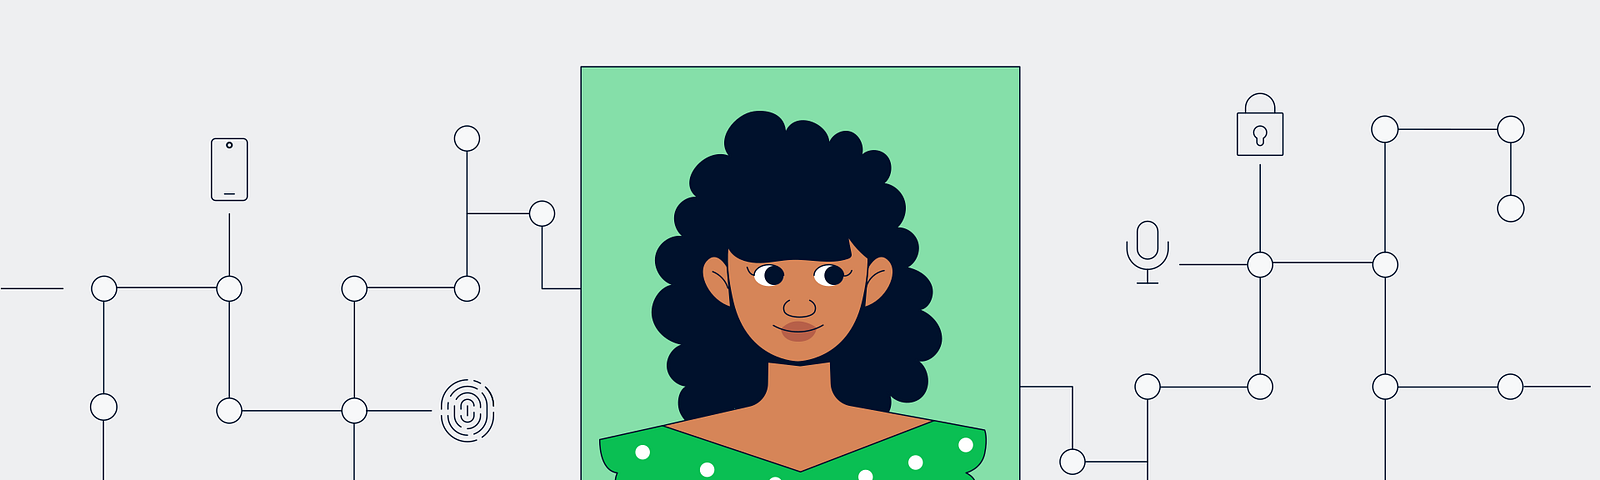 Illustration of a potrait picture of a person. The picture has a green background. The person wears a top with green color and white polka dots. This potrait has different lines connecting to its edges. The lines terminate with illustrations of credit card, finger print, microphone, padlock etc.